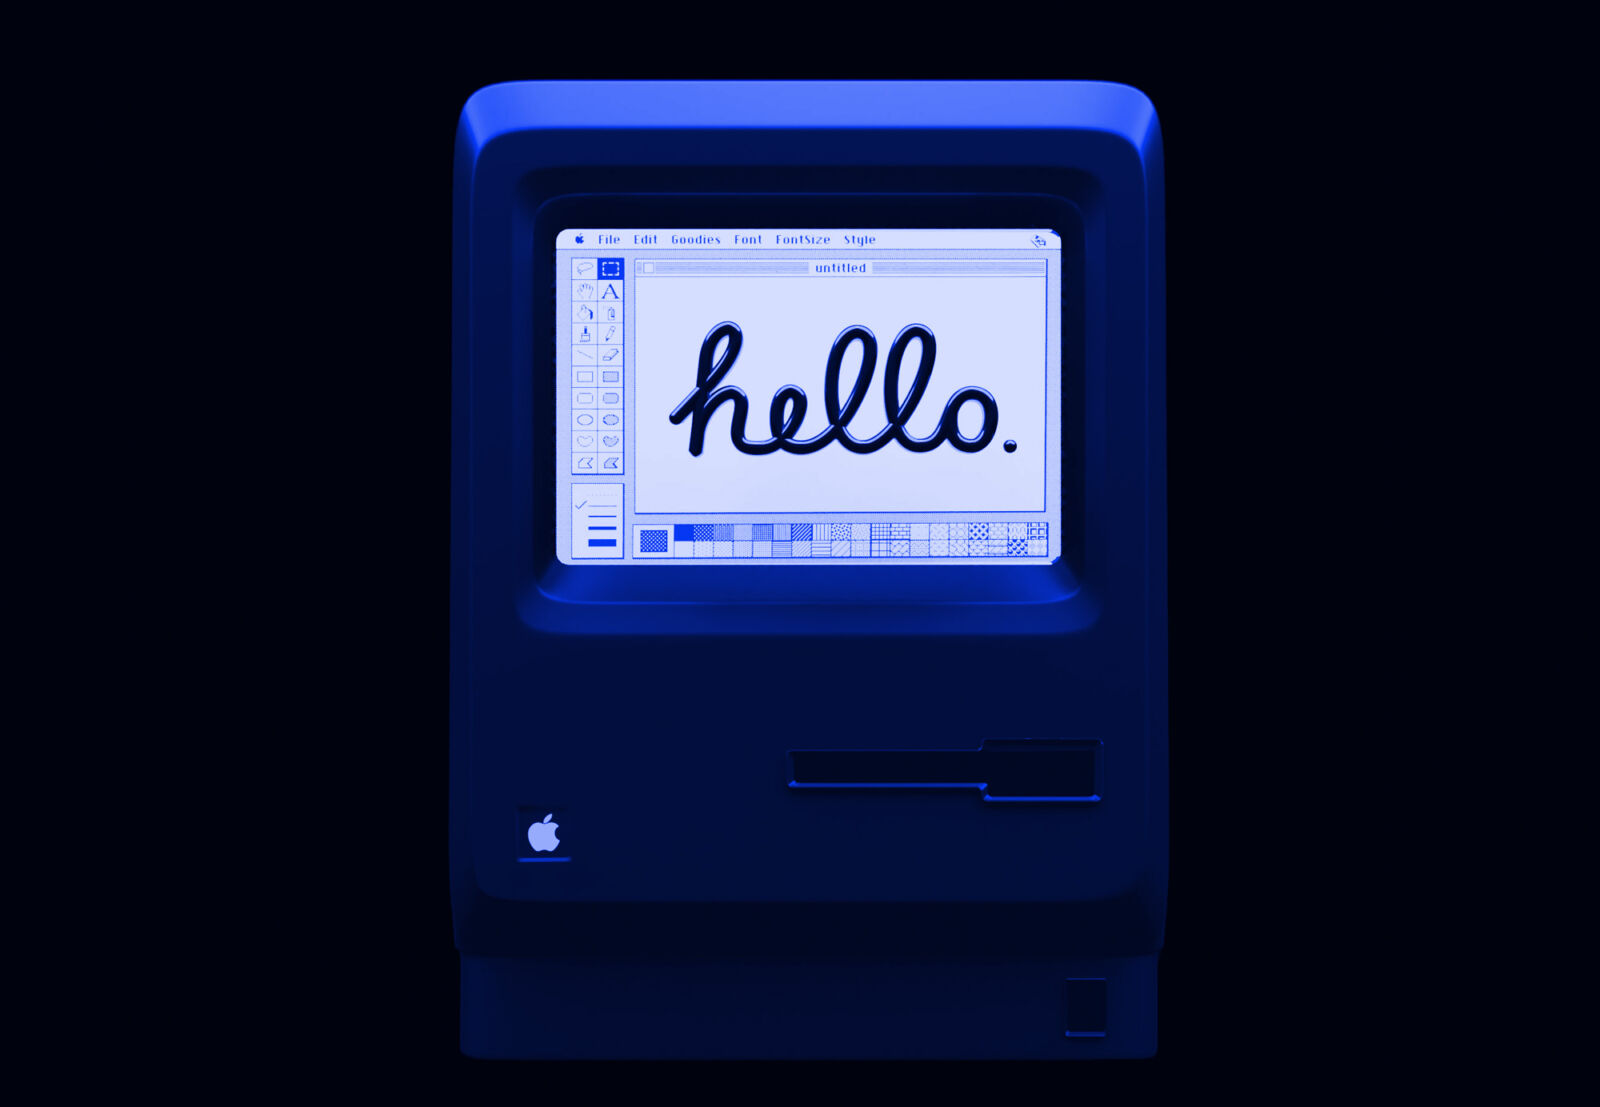 The Best Ads featuring Apple's famous "hello" on a Mac 2